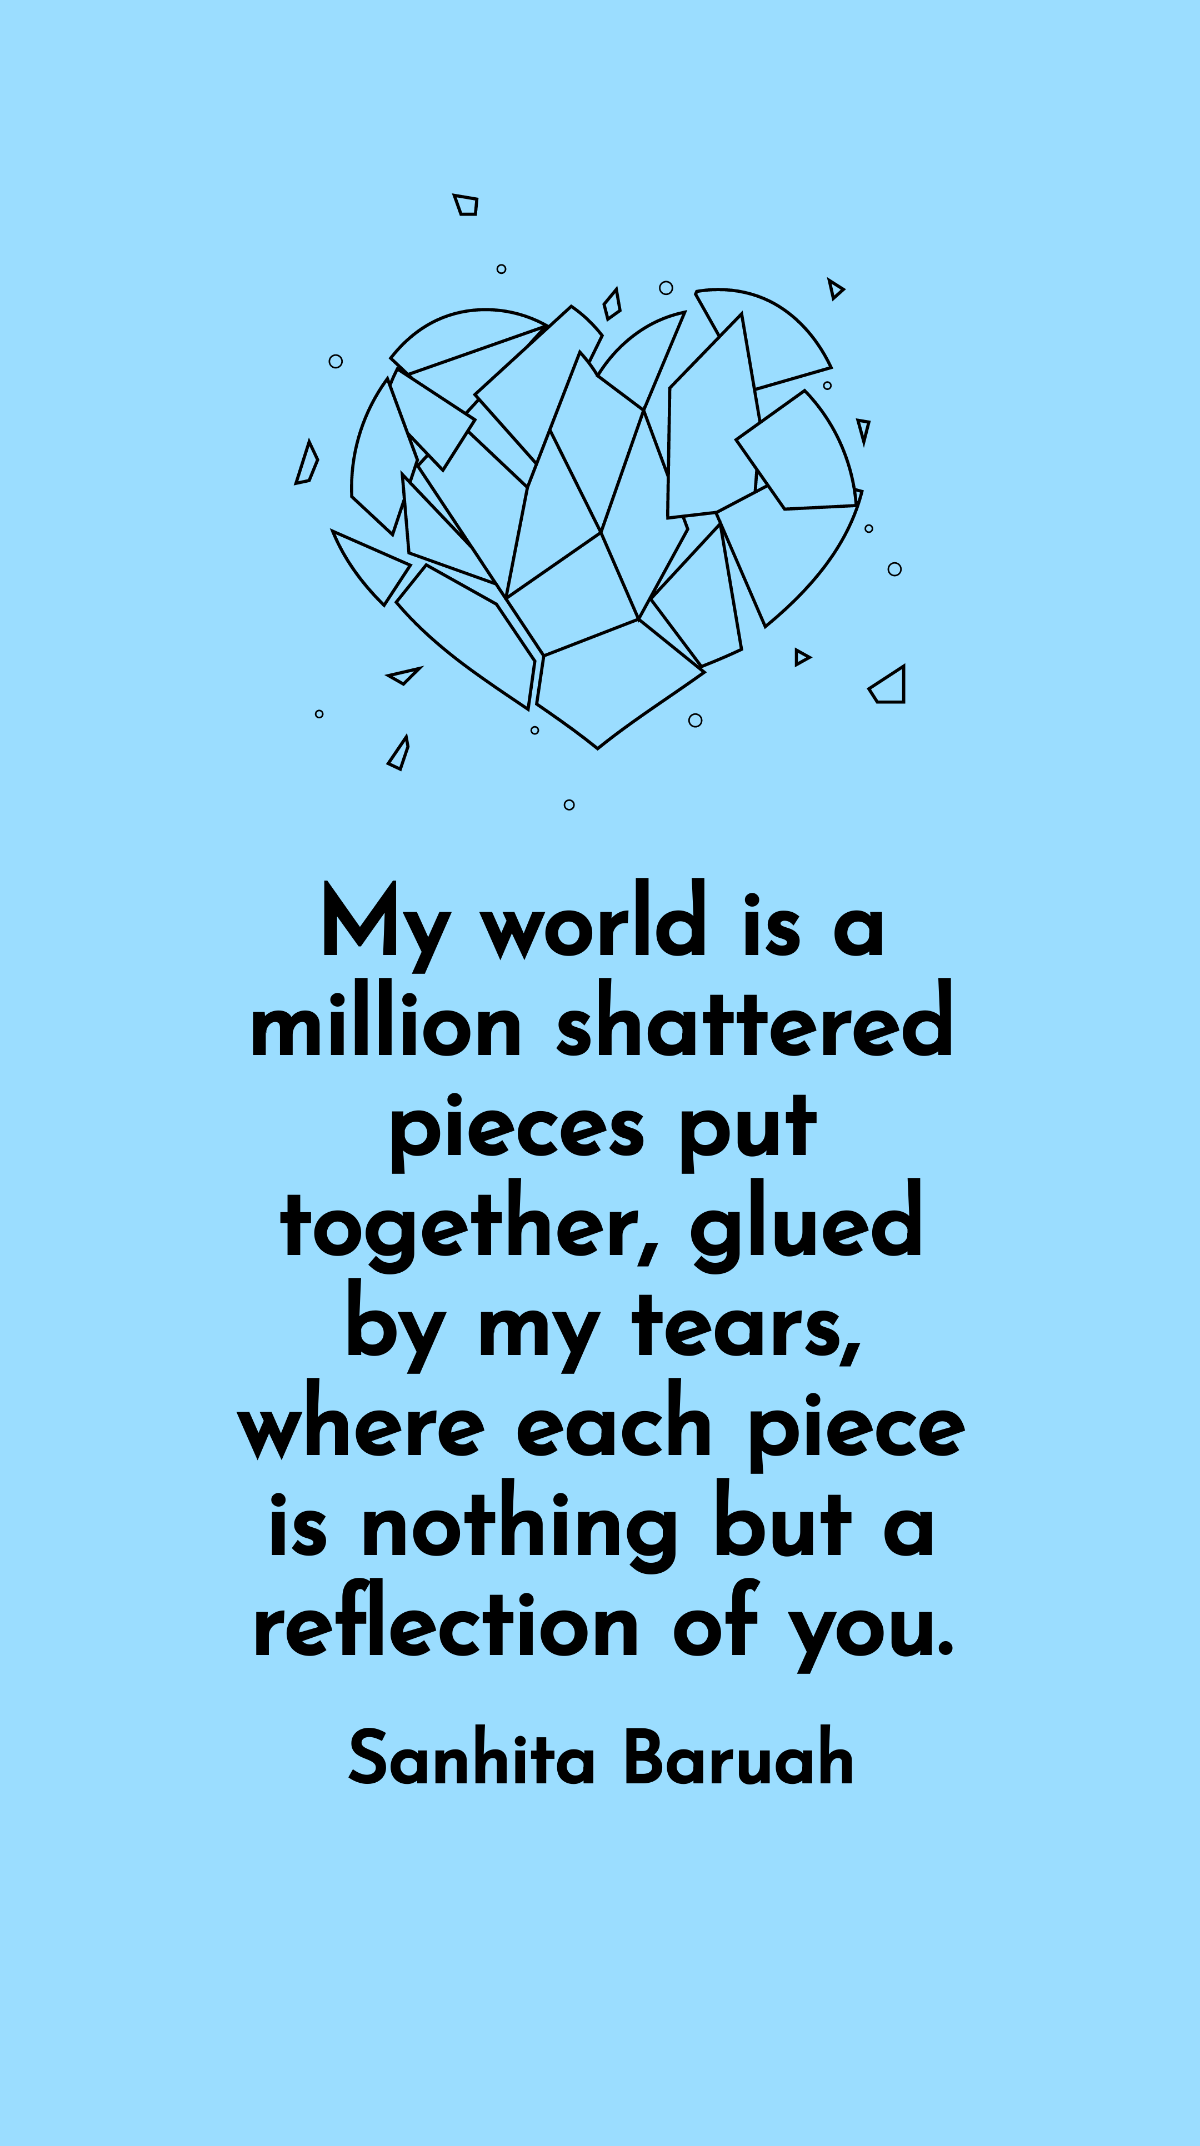 Sanhita Baruah - My world is a million shattered pieces put together, glued by my tears, where each piece is nothing but a reflection of you.